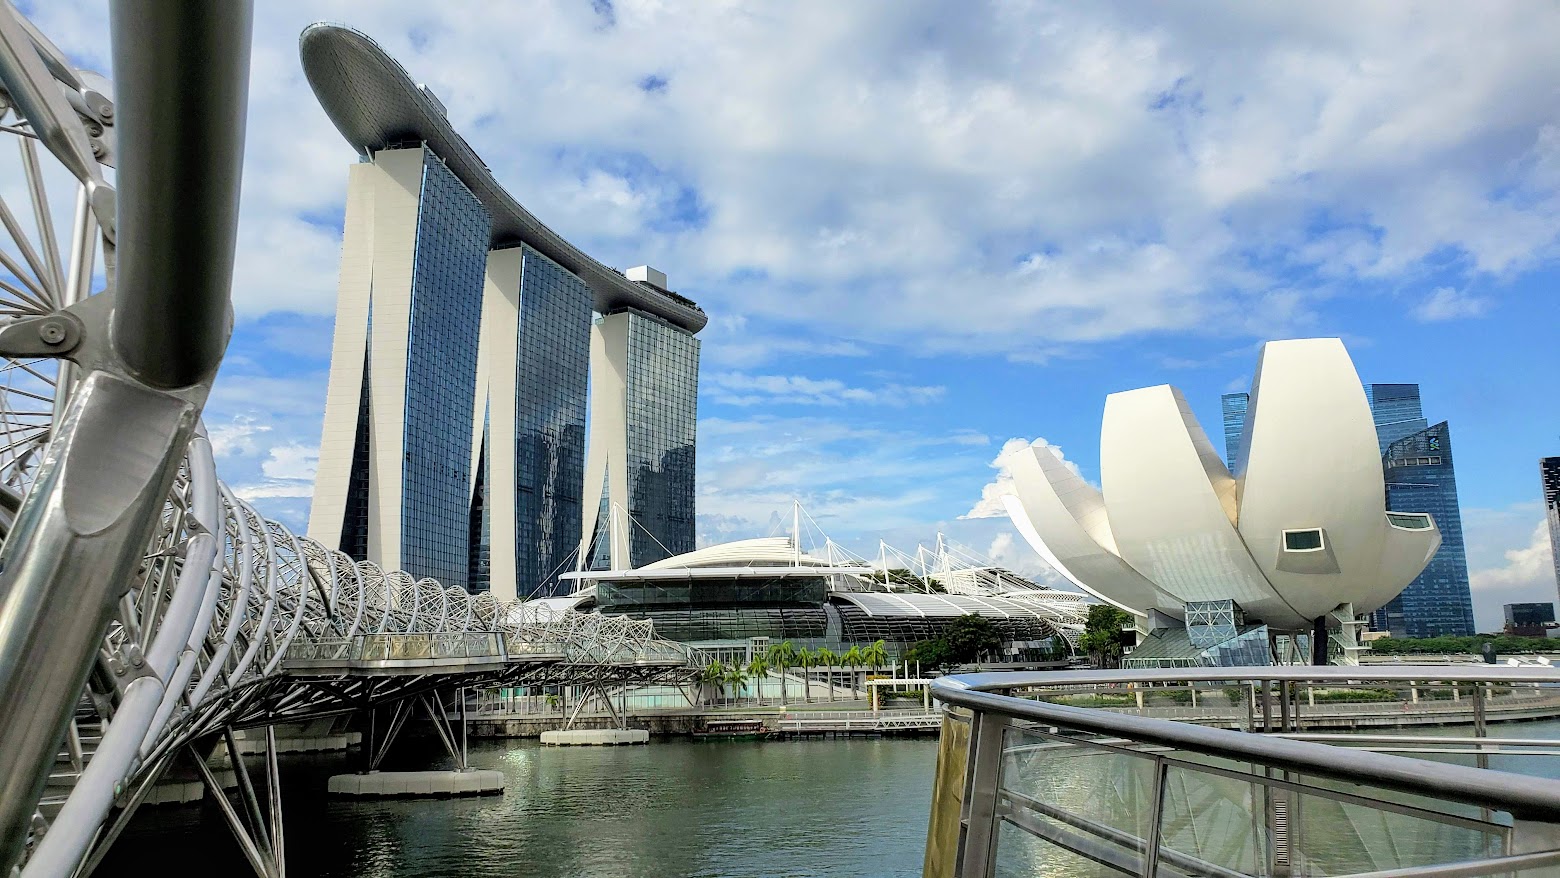 Guide to Visiting Marina Bay Sands, Singapore: Marina Bay Sands and ArtScience Museum with view of Helix Bridge